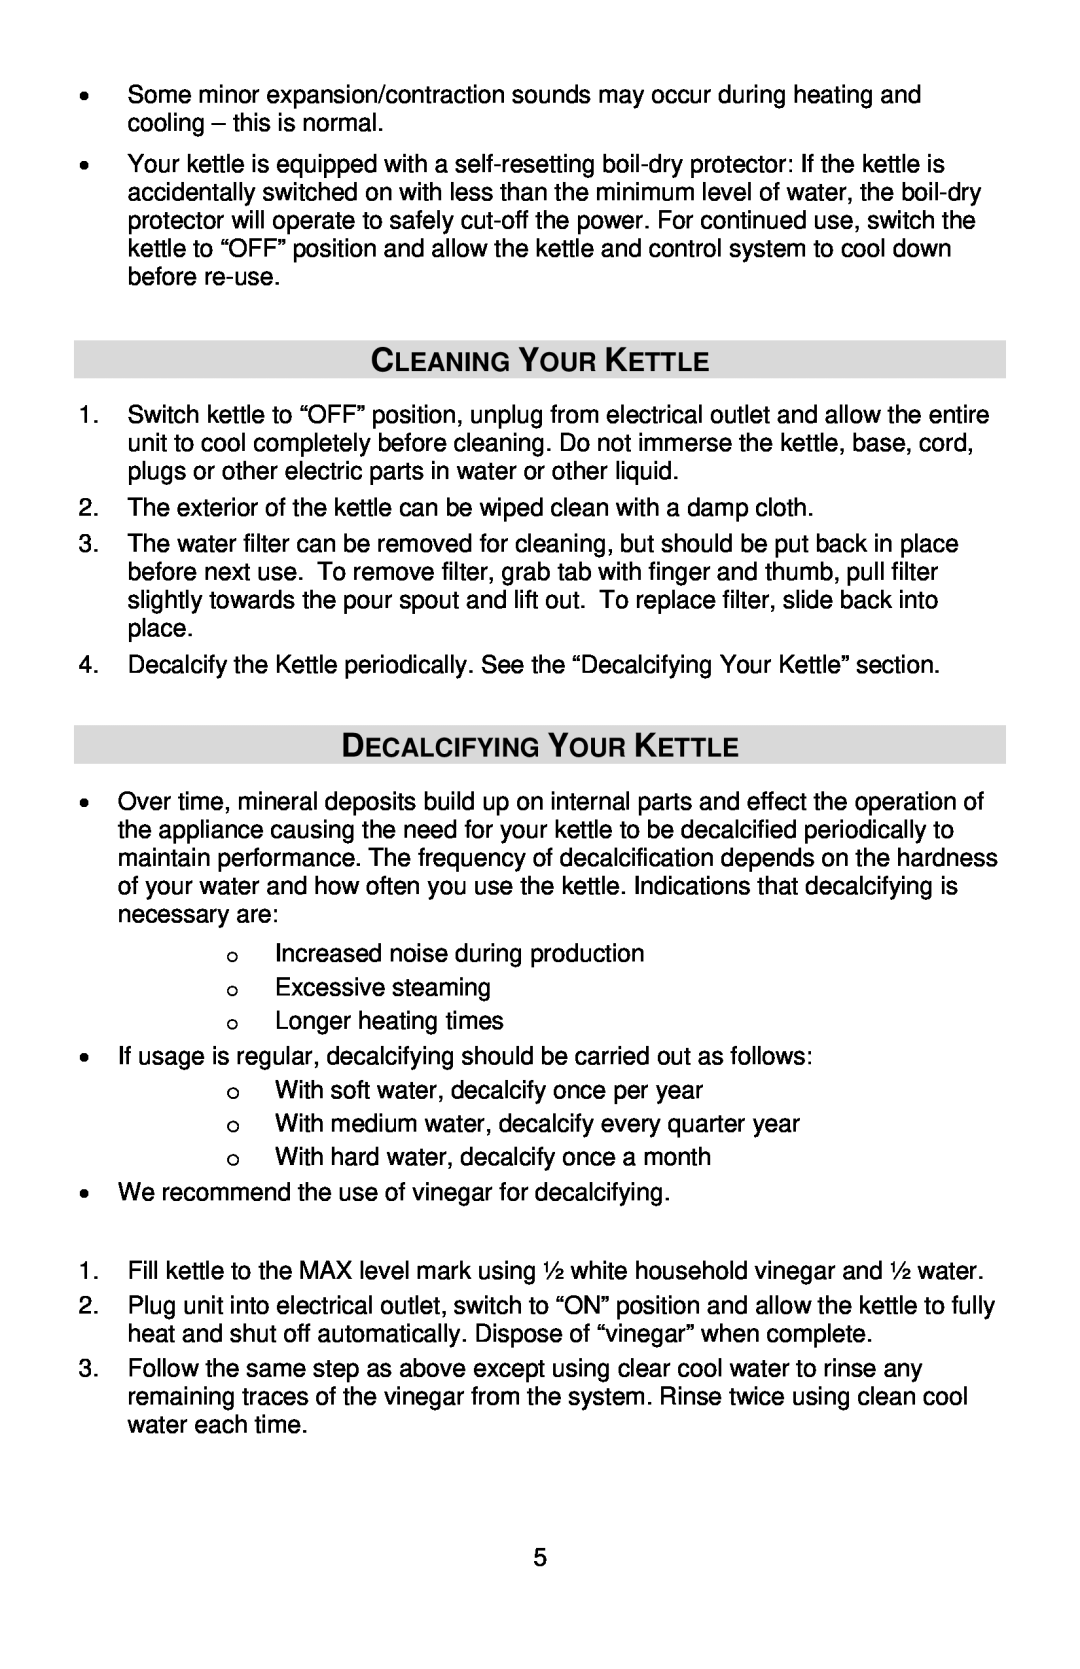 West Bend instruction manual Cleaning Your Kettle, Decalcifying Your Kettle 